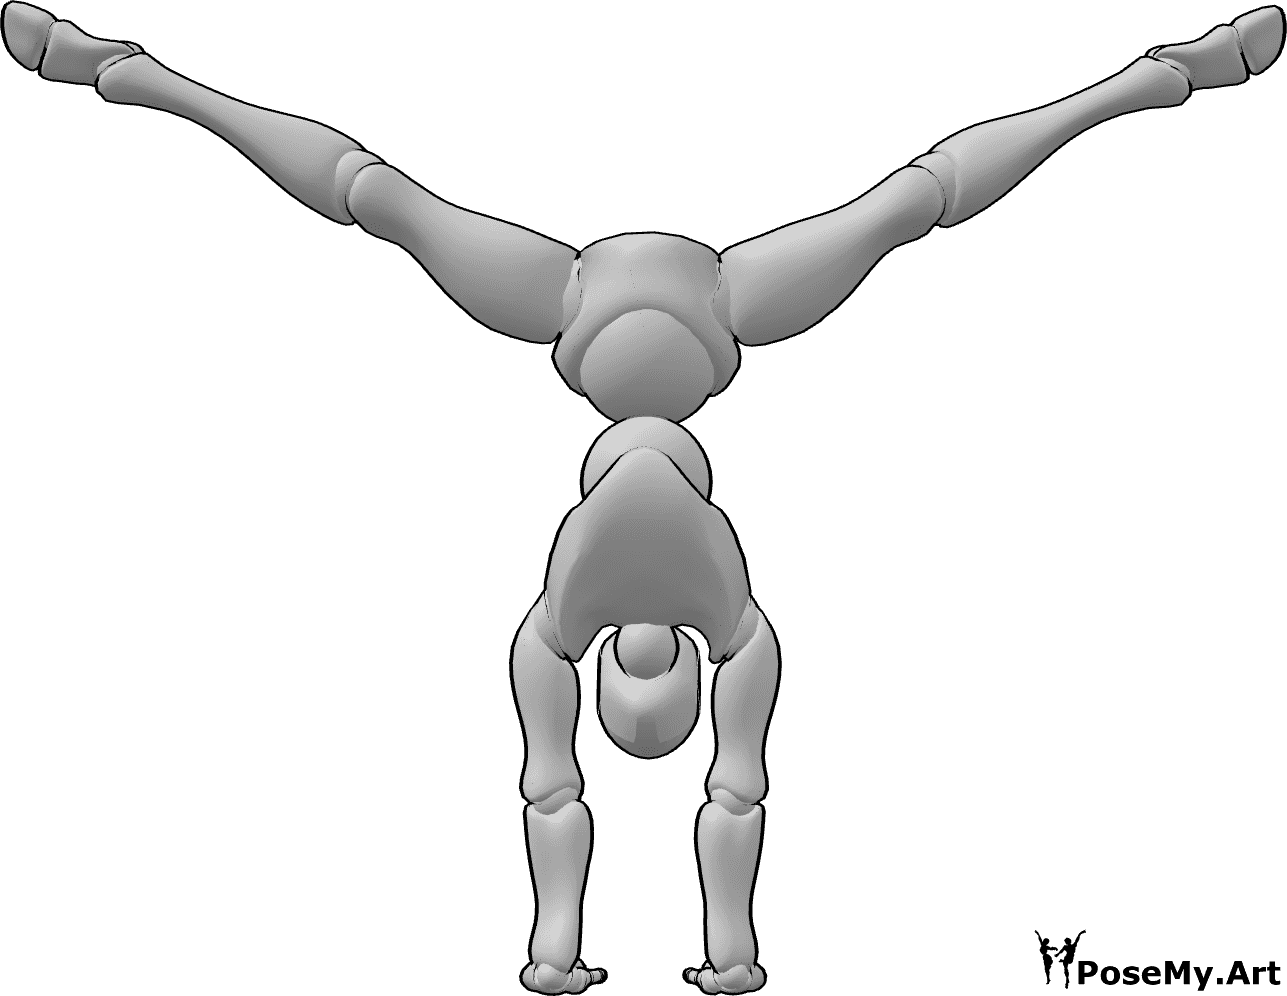 Pose Reference - Handstand side split pose - Female is standing on her hands and doing a side split